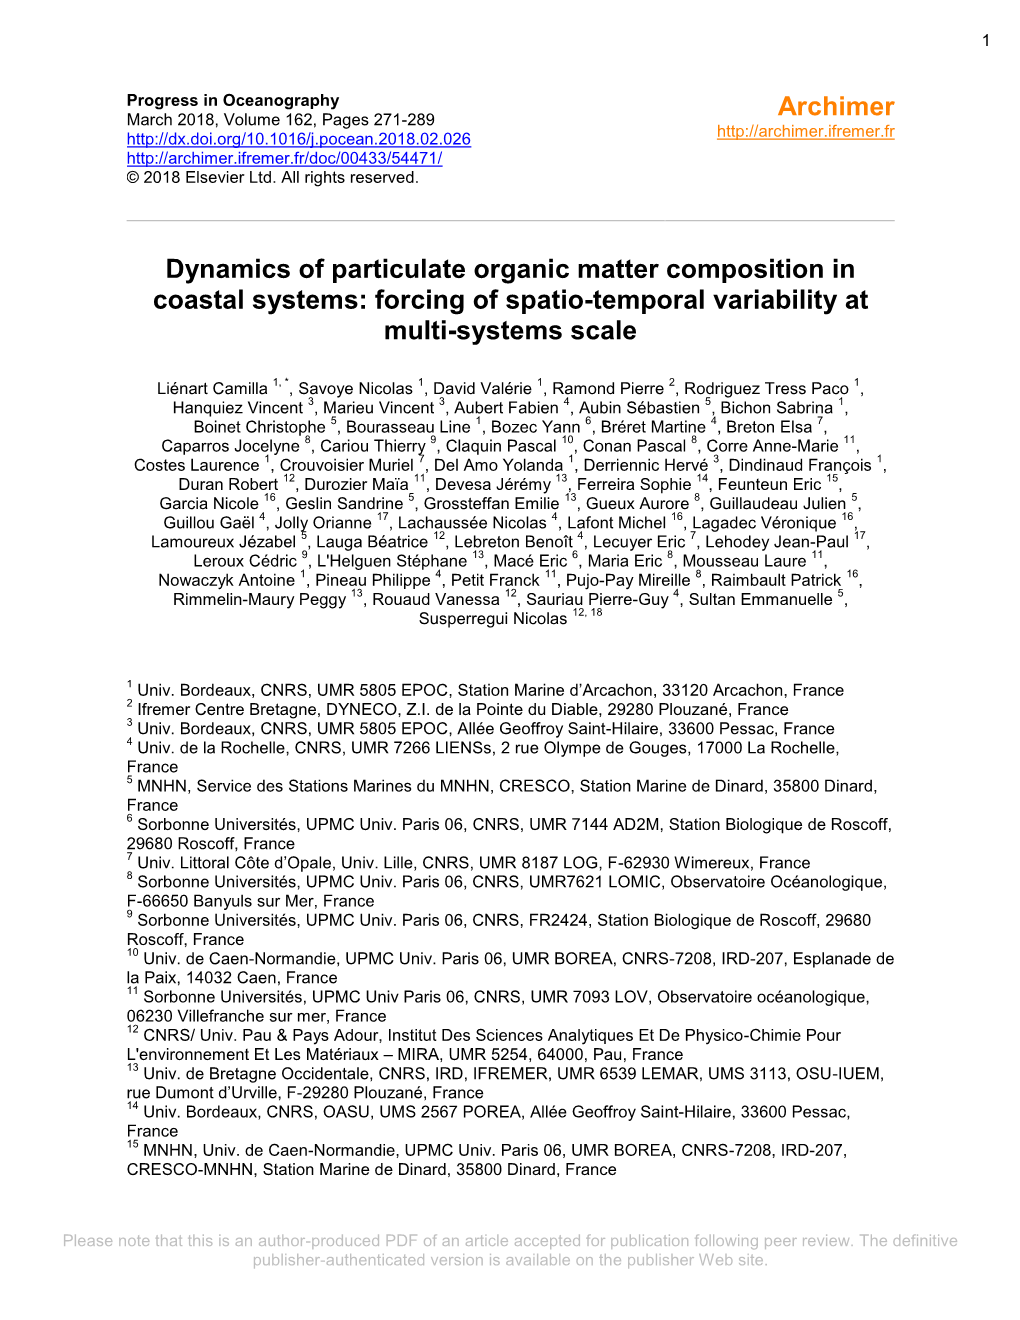 Dynamics of Particulate Organic Matter Composition in Coastal Systems: Forcing of Spatio-Temporal Variability at Multi-Systems Scale